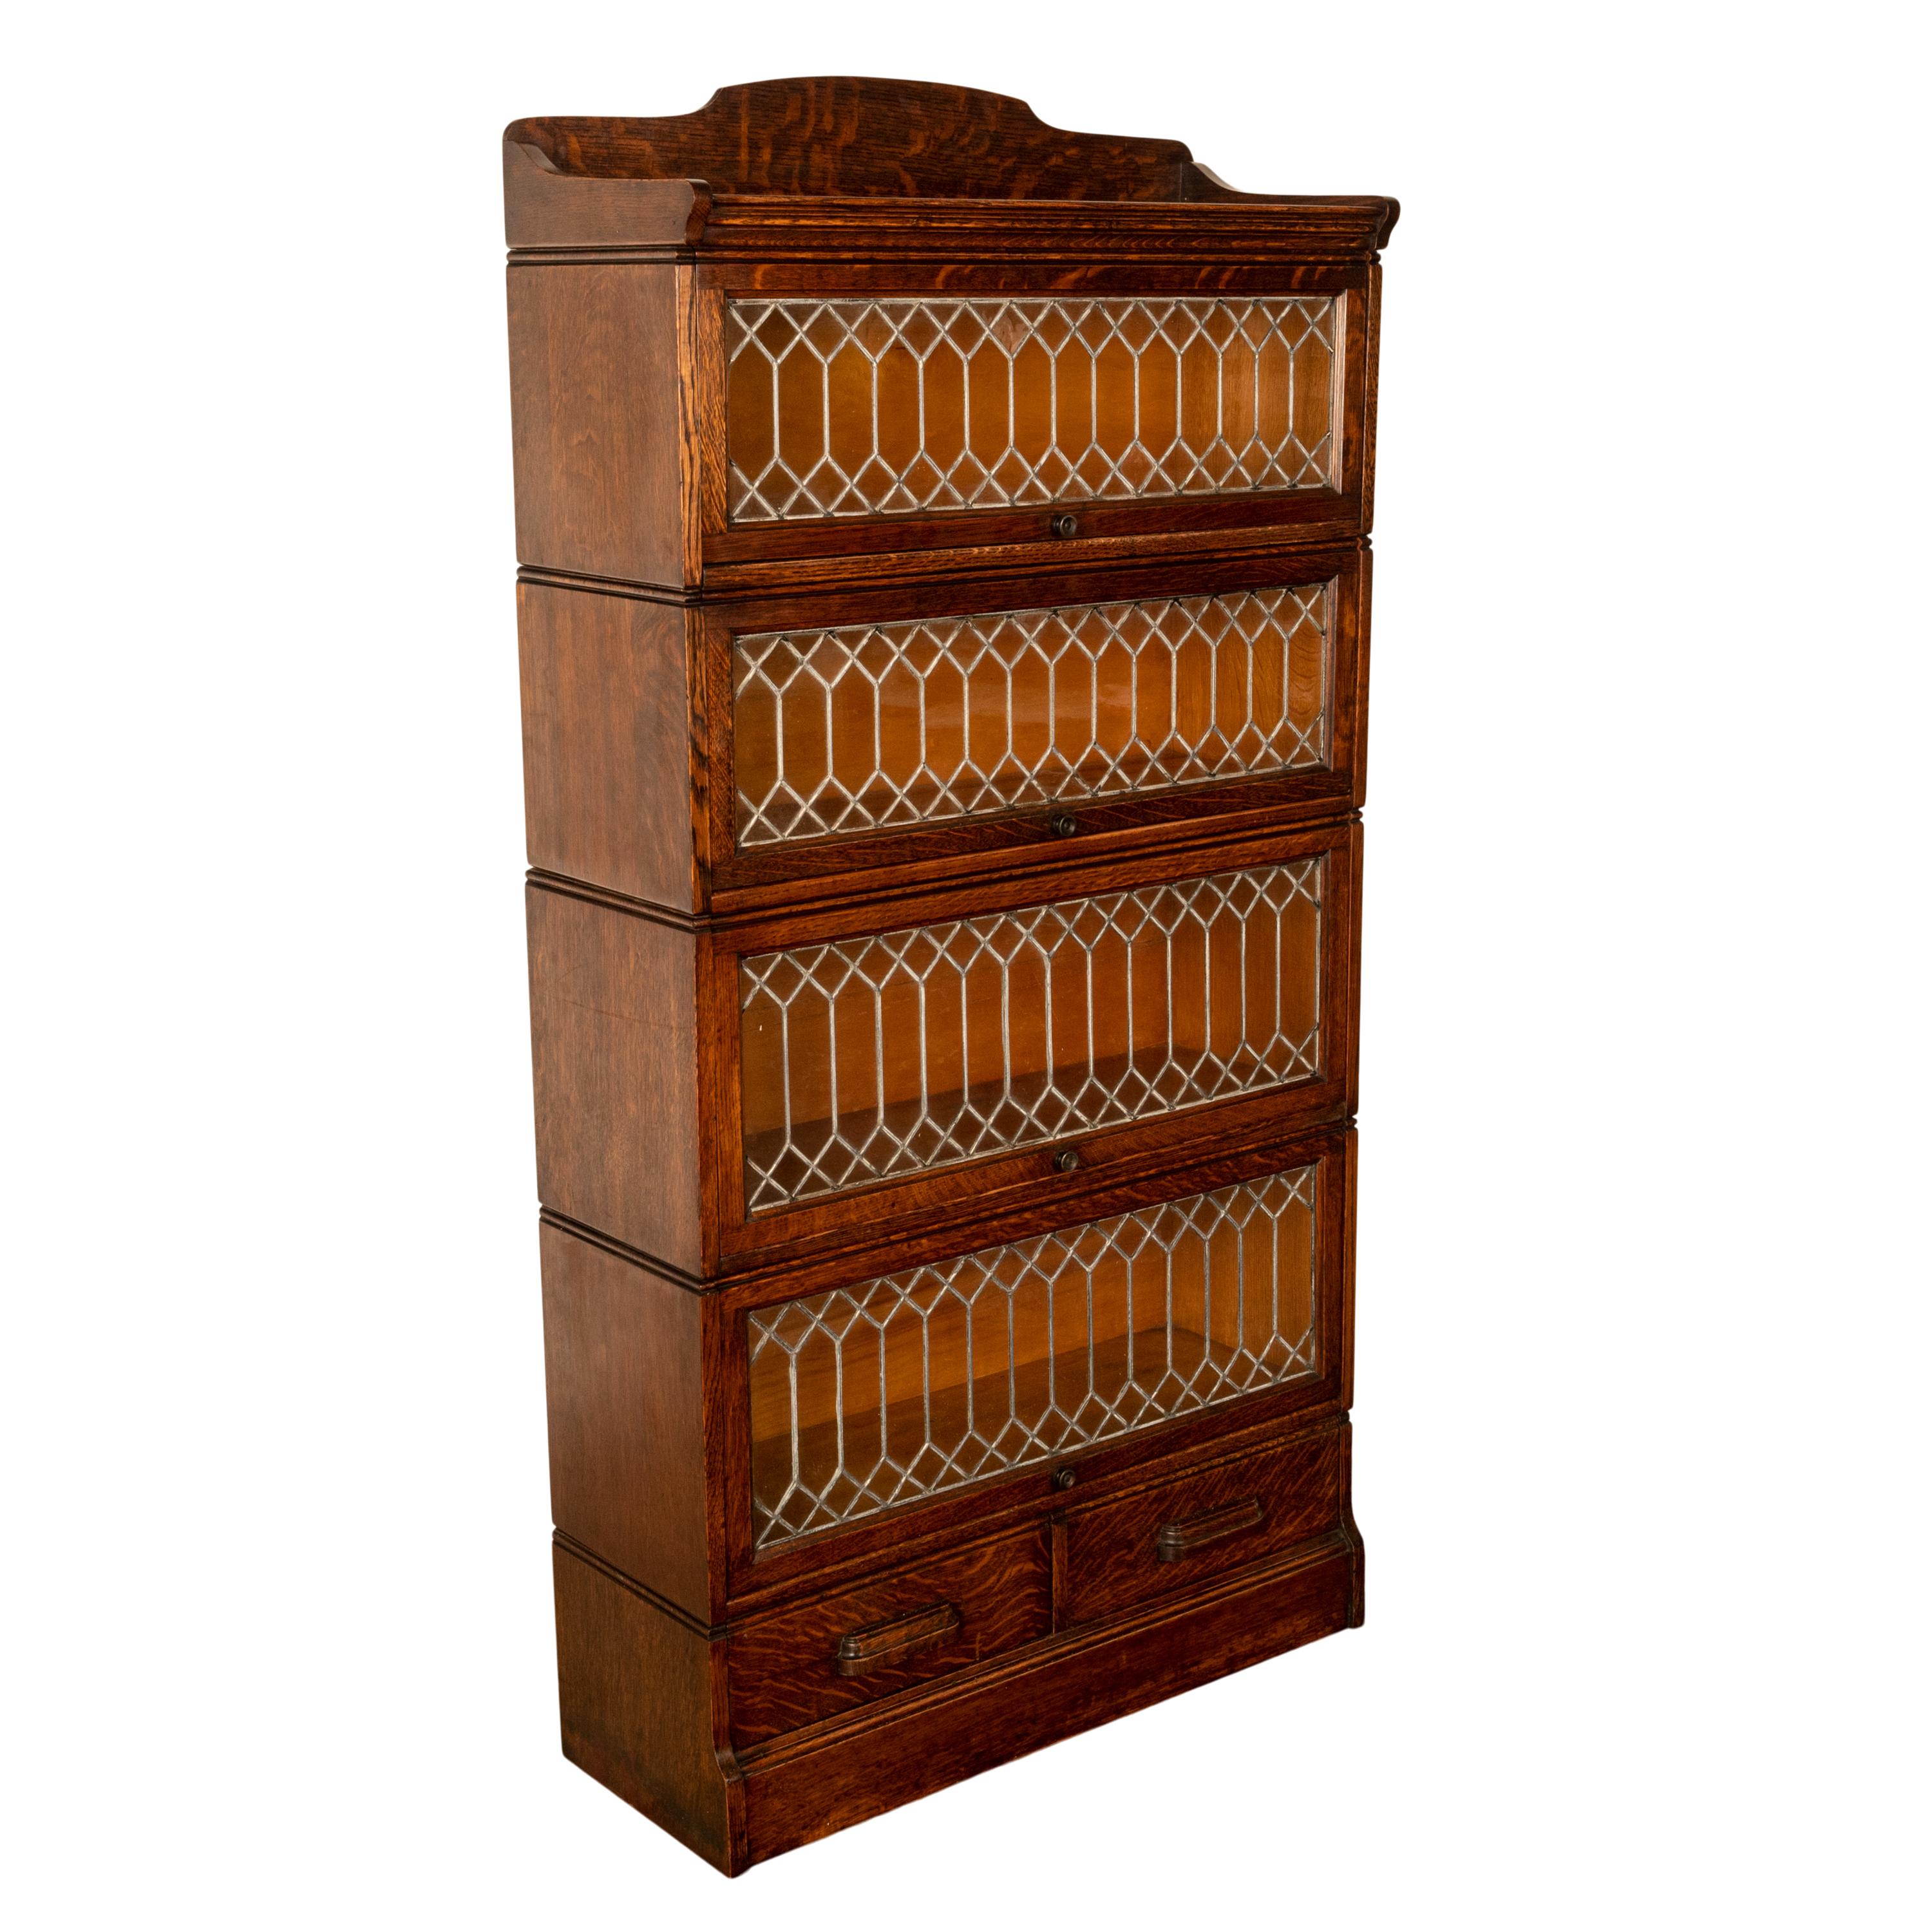 A very good quality antique American Craftsman/Mission six section quarter sawn oak stacking bookcase, circa 1910.
This outstanding example of an early 20th century lawyer's bookcase comprises six sections; the top having a galleried back with four